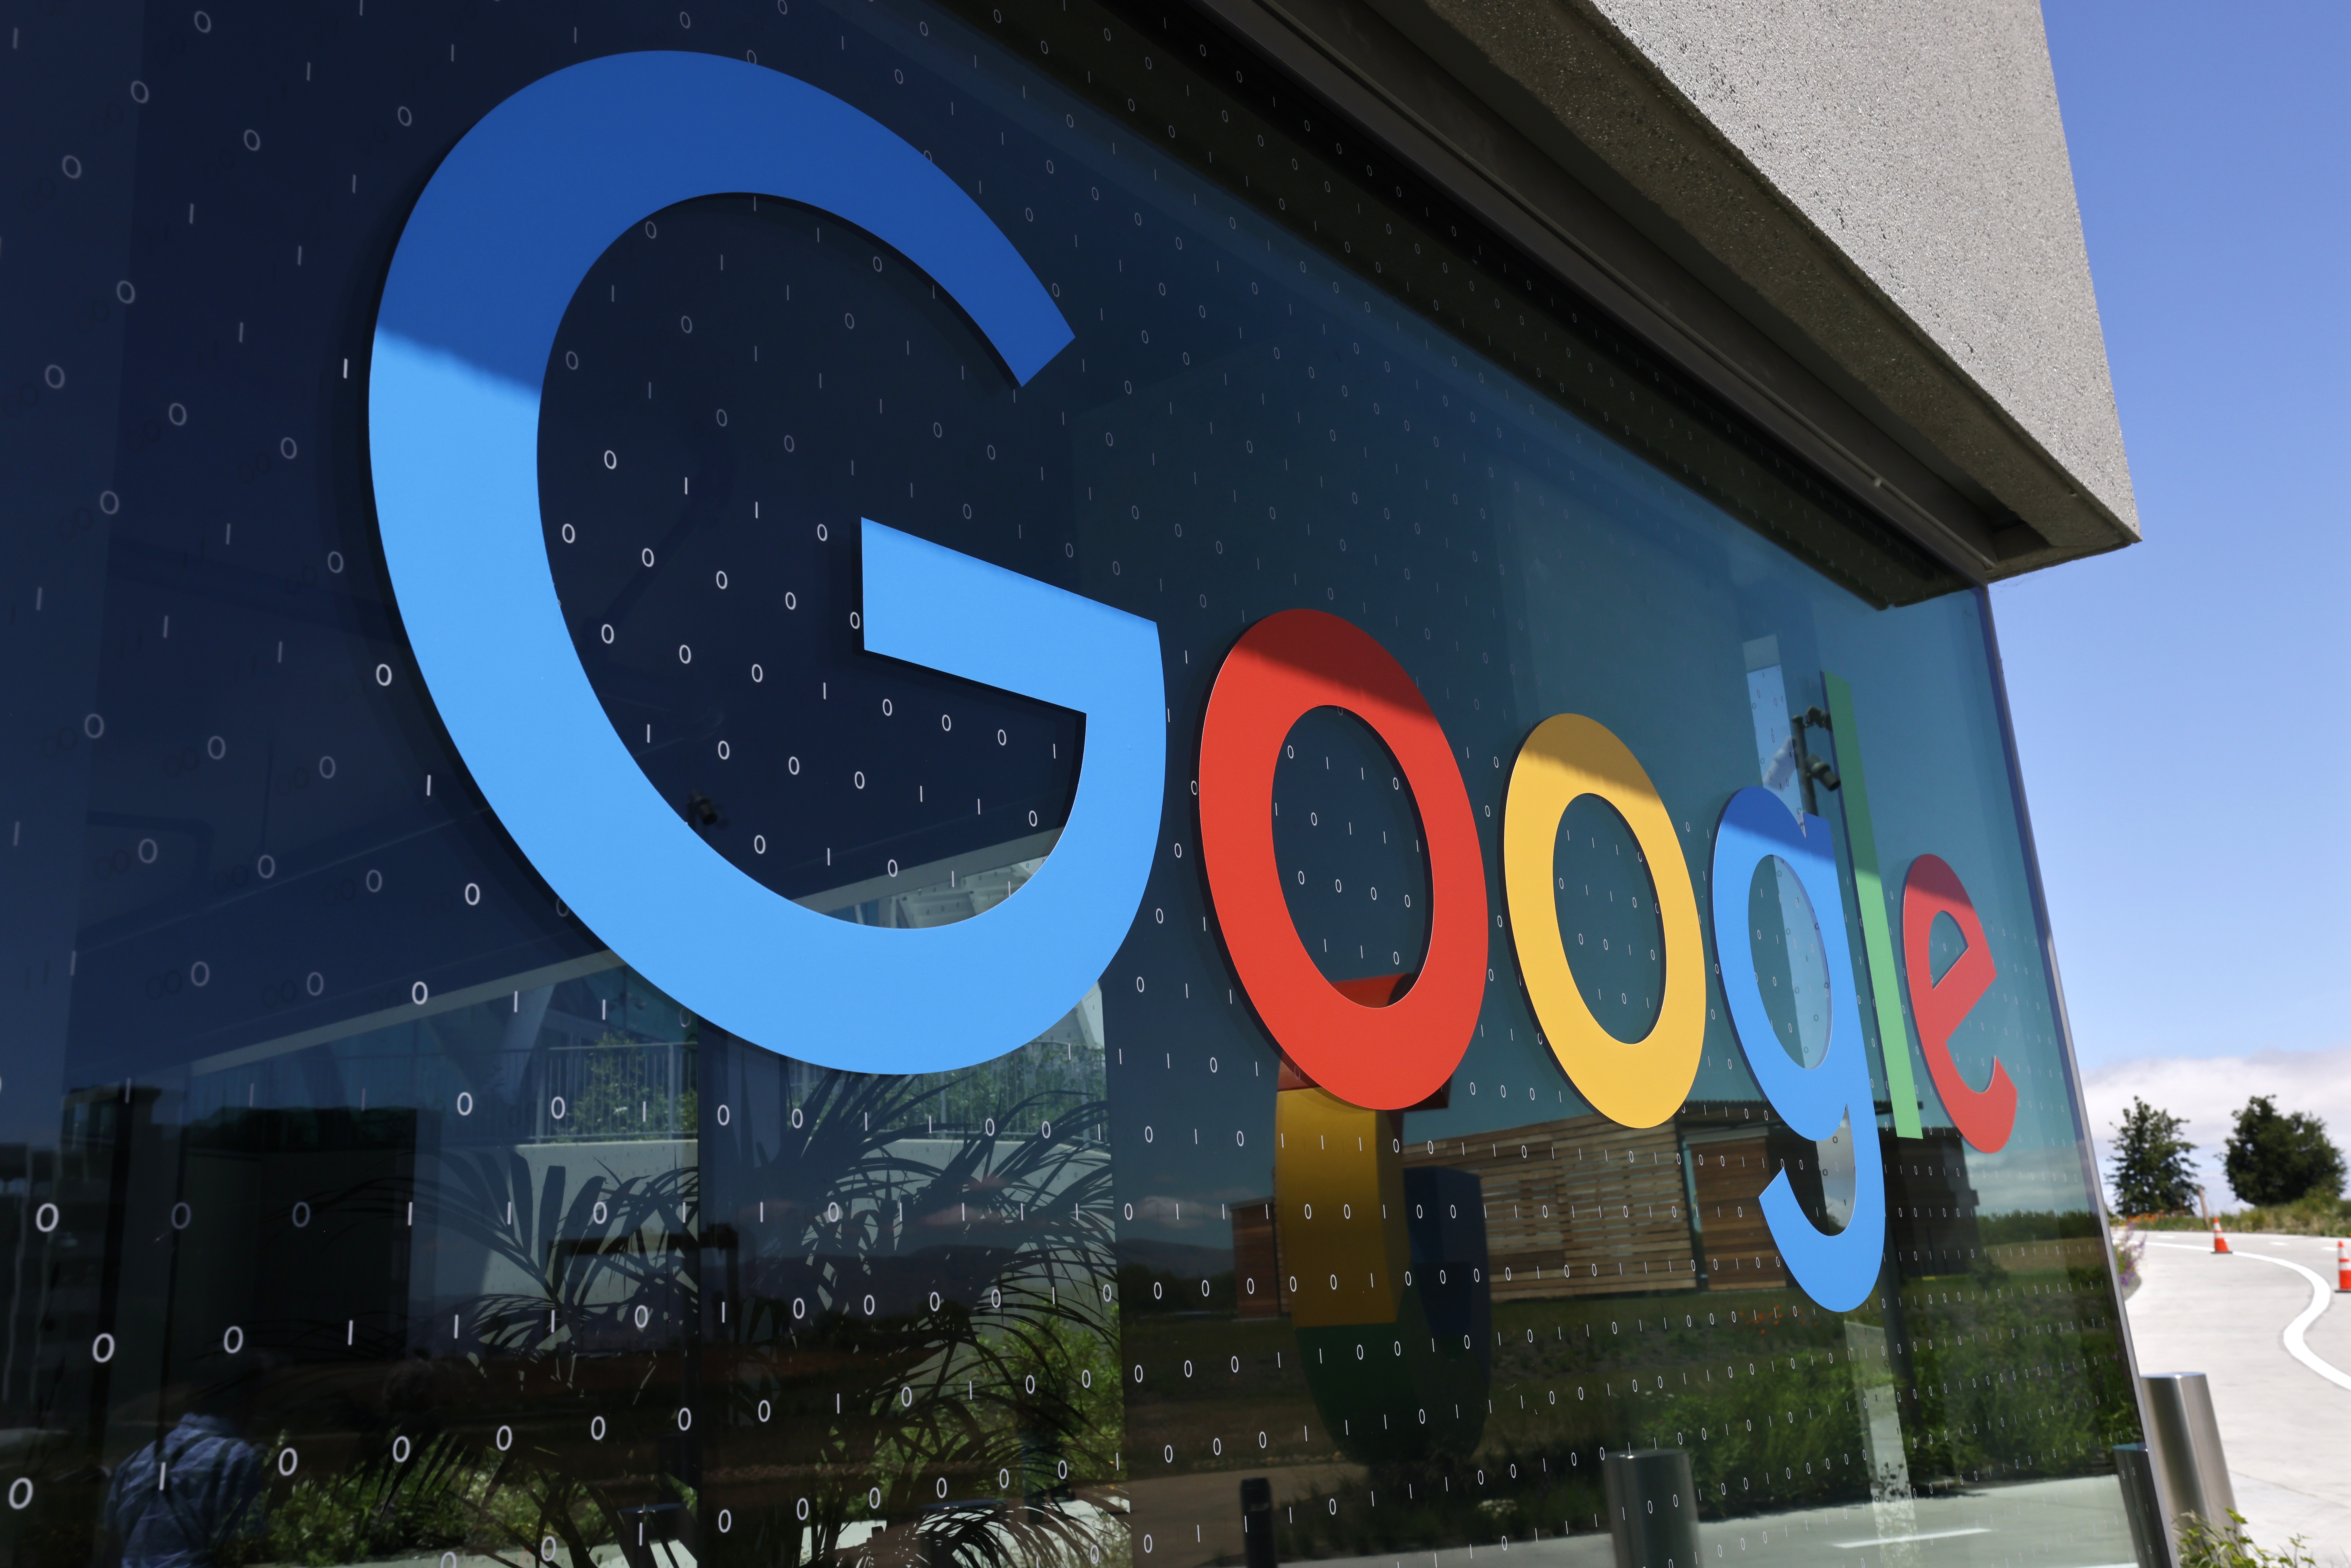 Google is eliminating key positions and will move some jobs to India and Mexico